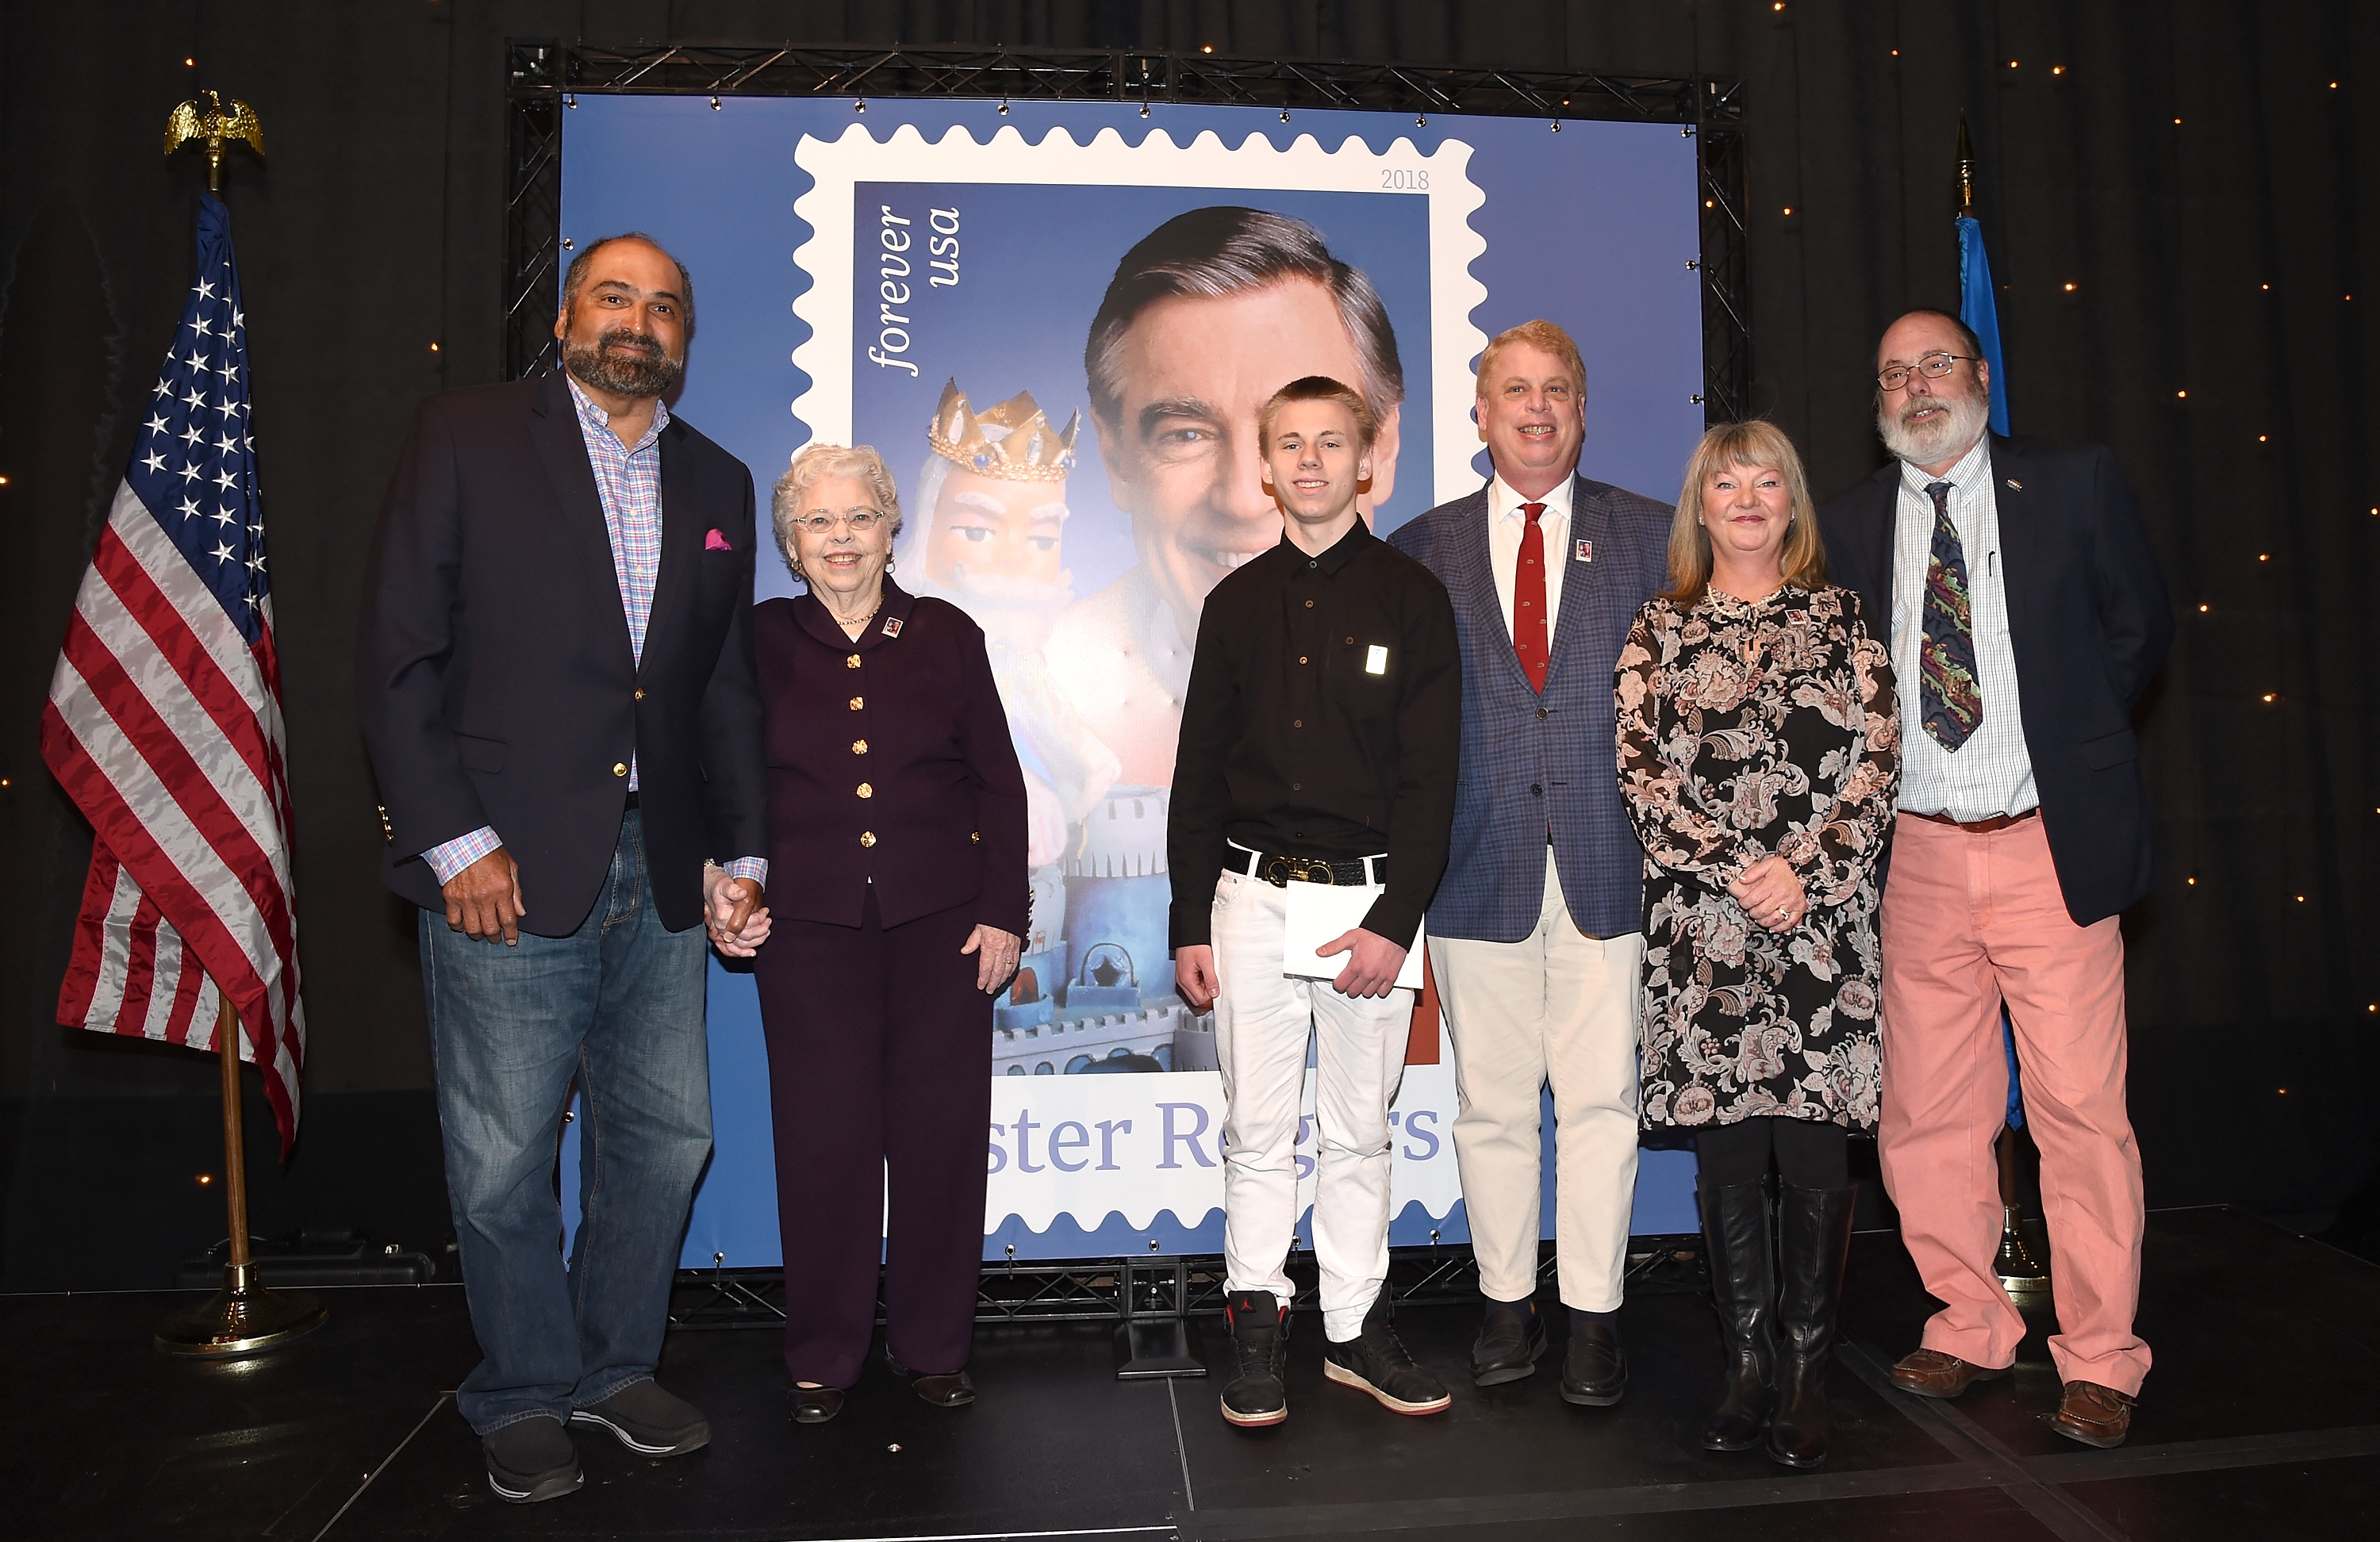 Joanne Rogers and former Pittsburgh Steeler Franco Harris pose for a photo with other family members during the U.S. Postal Service Dedication of the Mister Rogers Forever Stamp at WQED's Fred Rogers Studio on March 23, 2018 in Pittsburgh, Pennsylvania.  | Source: Getty Images